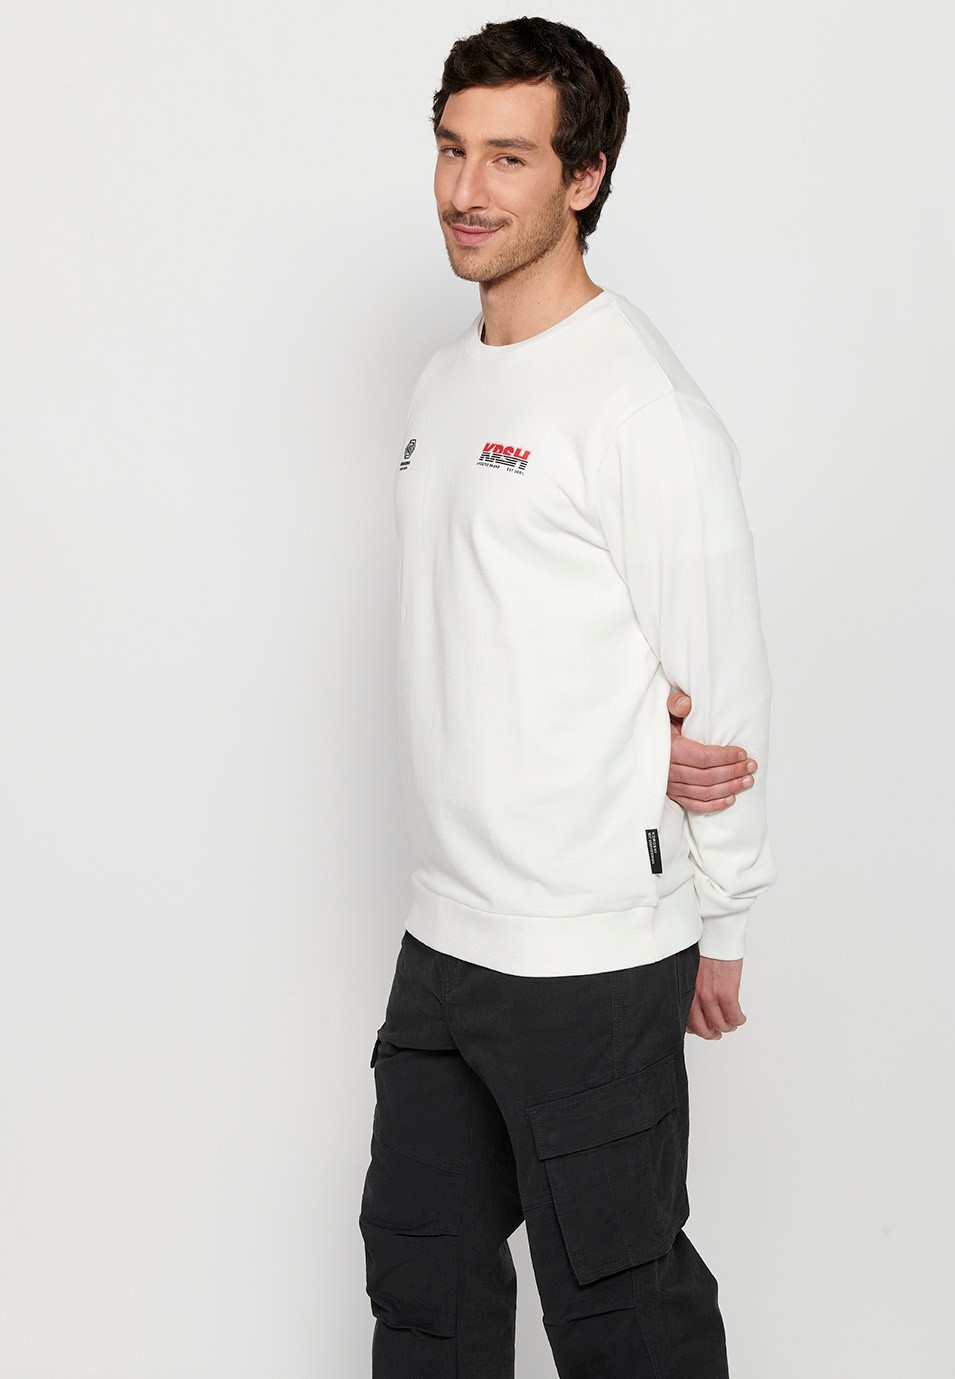 Long-sleeved sweatshirt with round neck and back detail in White for Men 1